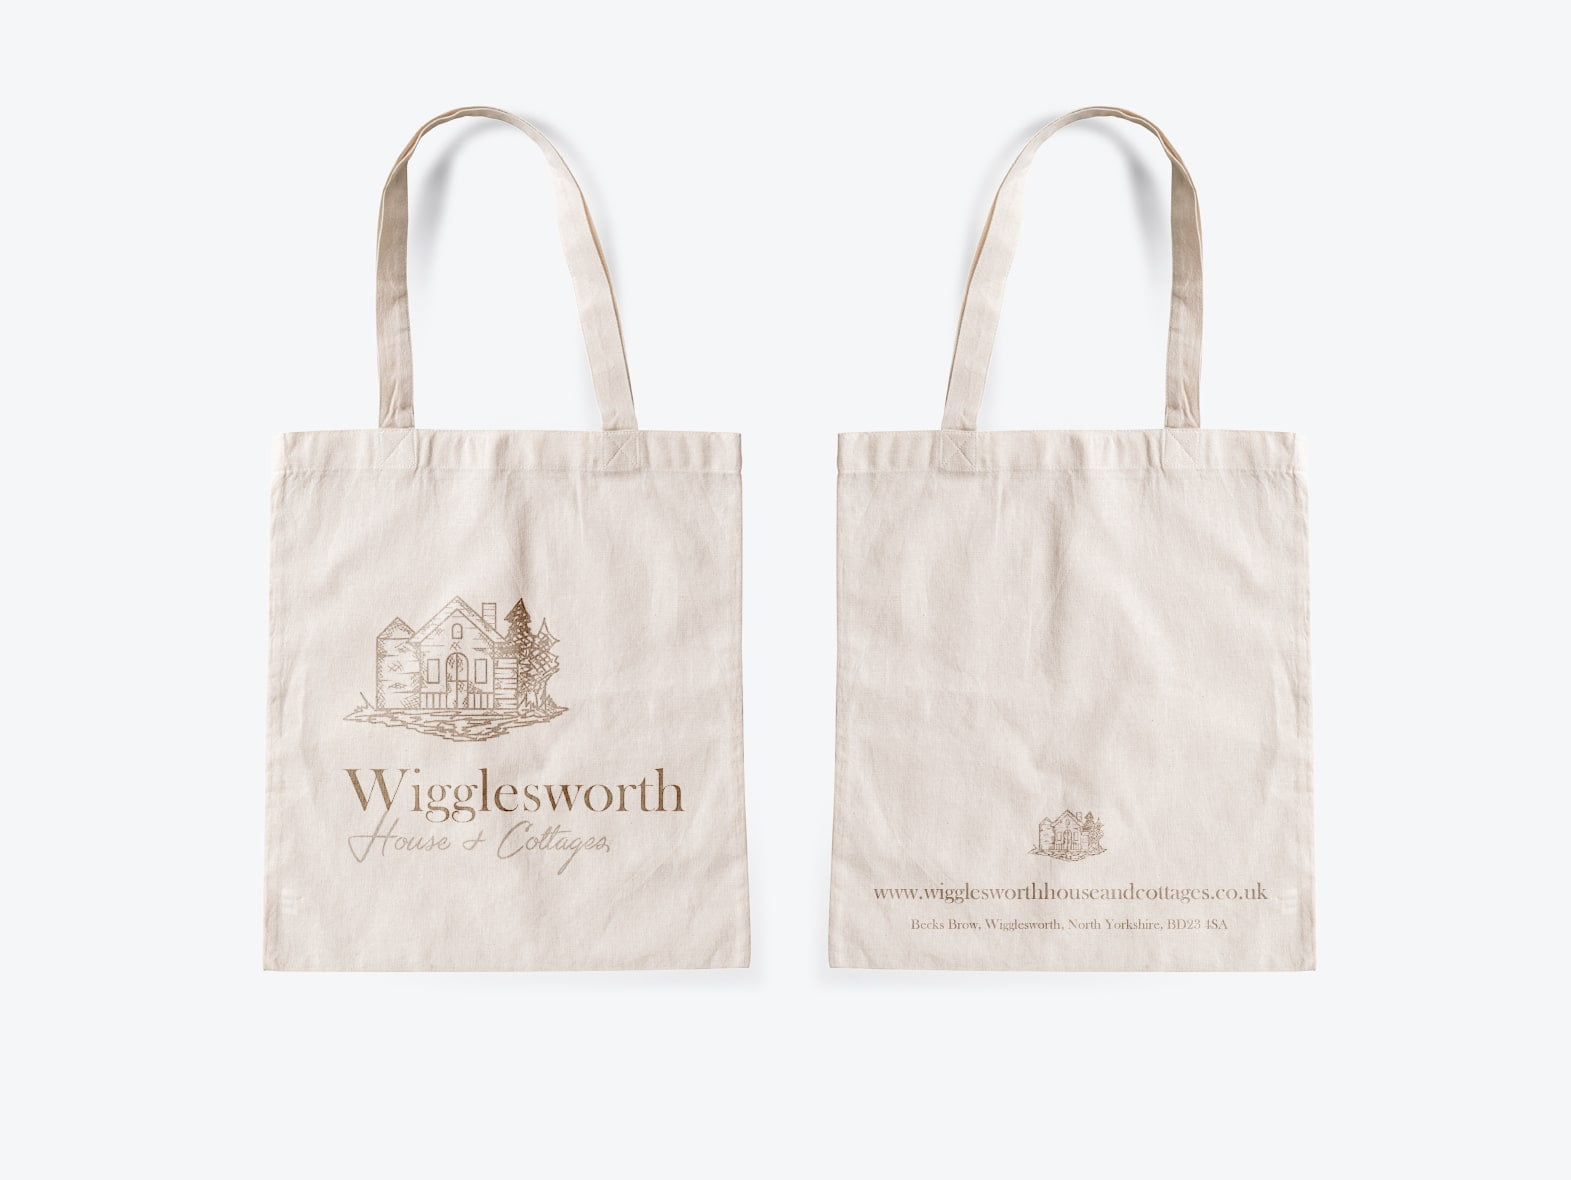 Brand identity across printed media including eco-friendly shopping bags